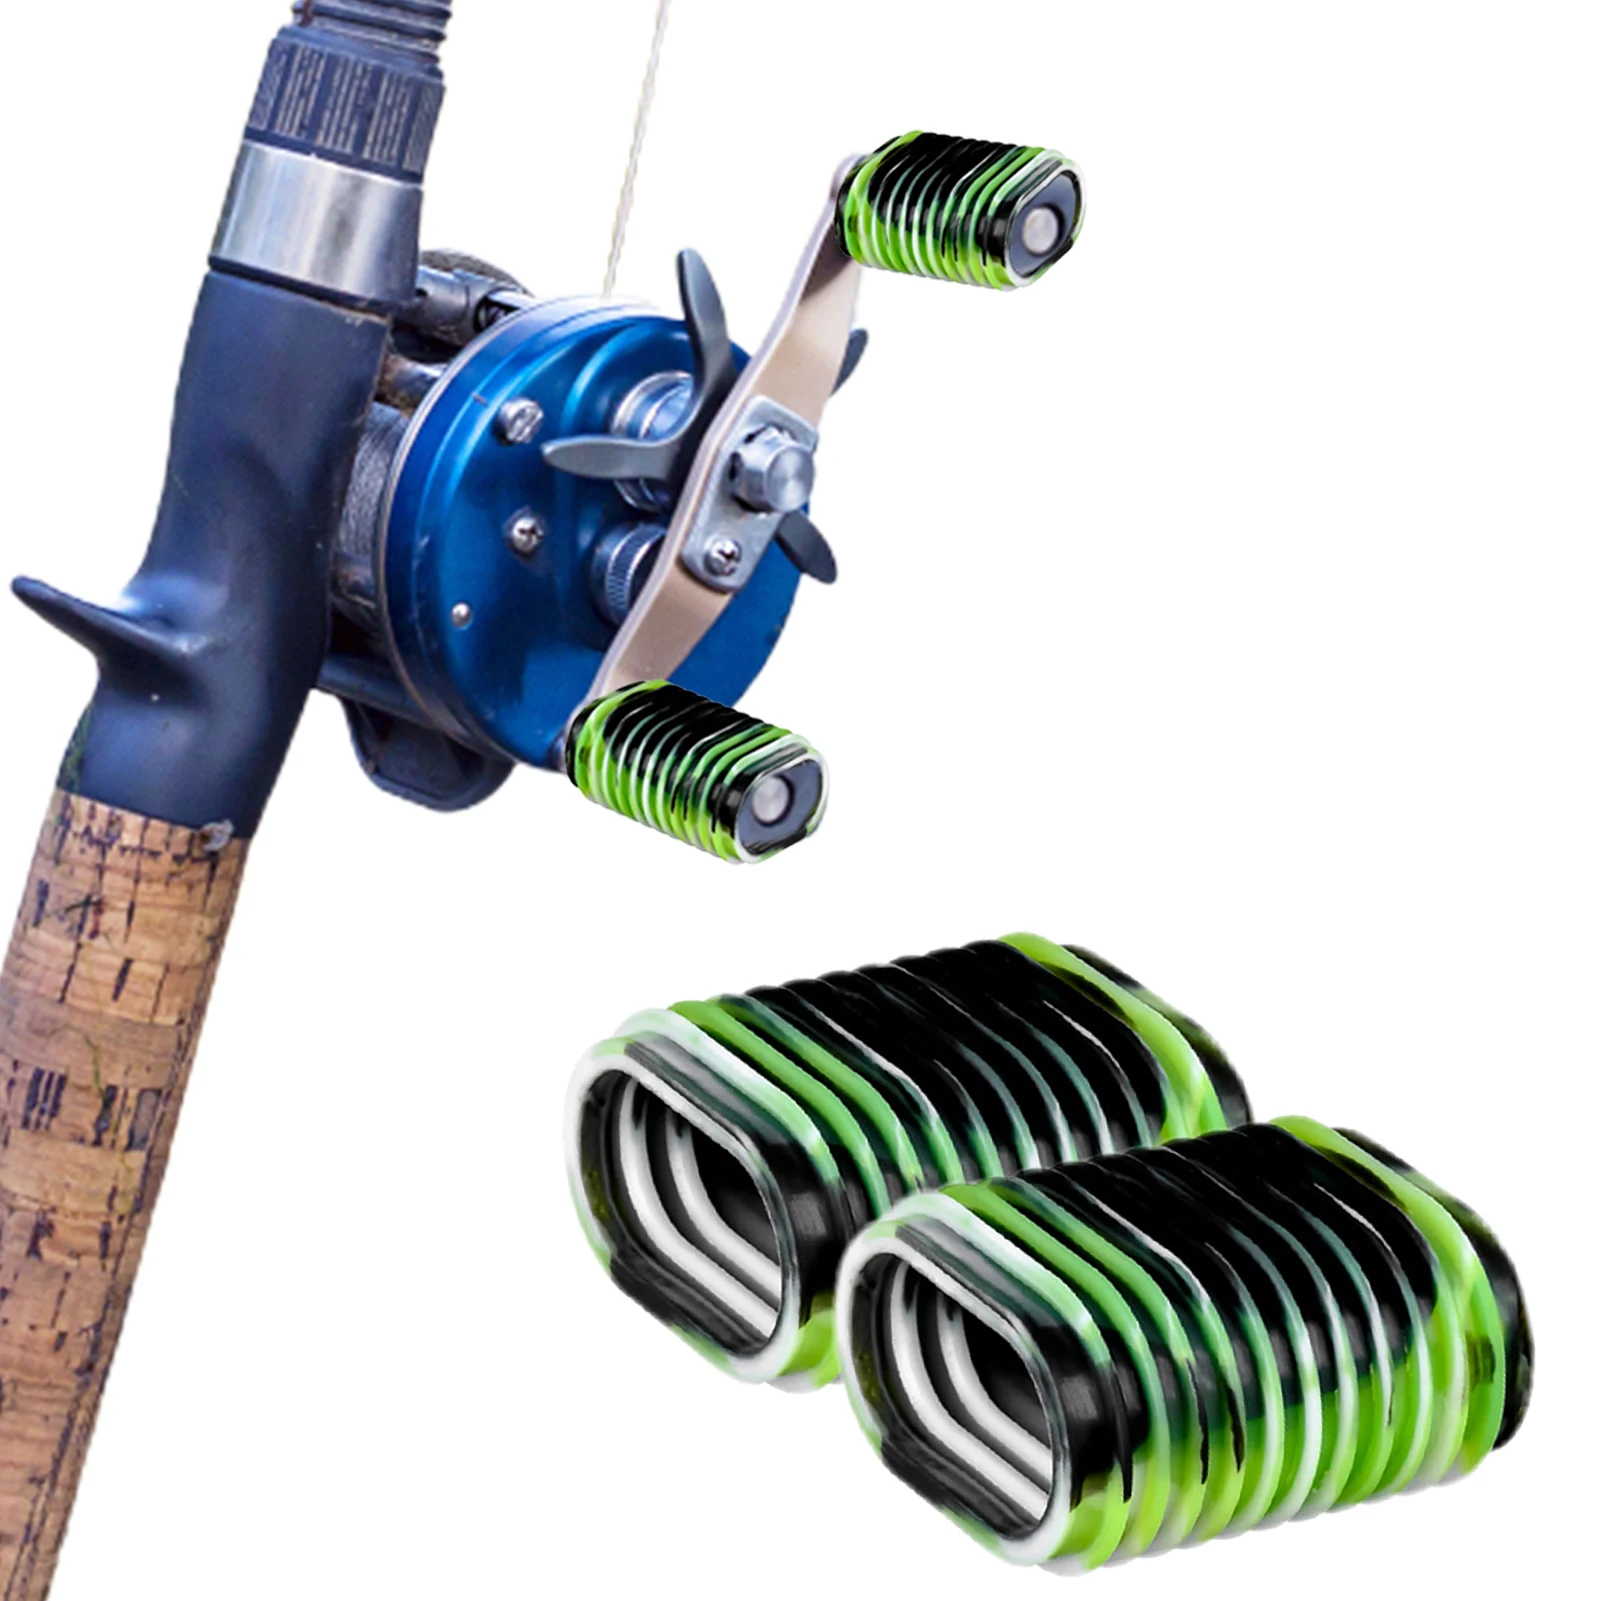 

Fishing Reel Handle Cove Fishing Reel Grip Cover Reduce Fatigue Fit Most Brands And Styles Of Fishing Spinning Baitcasting Or